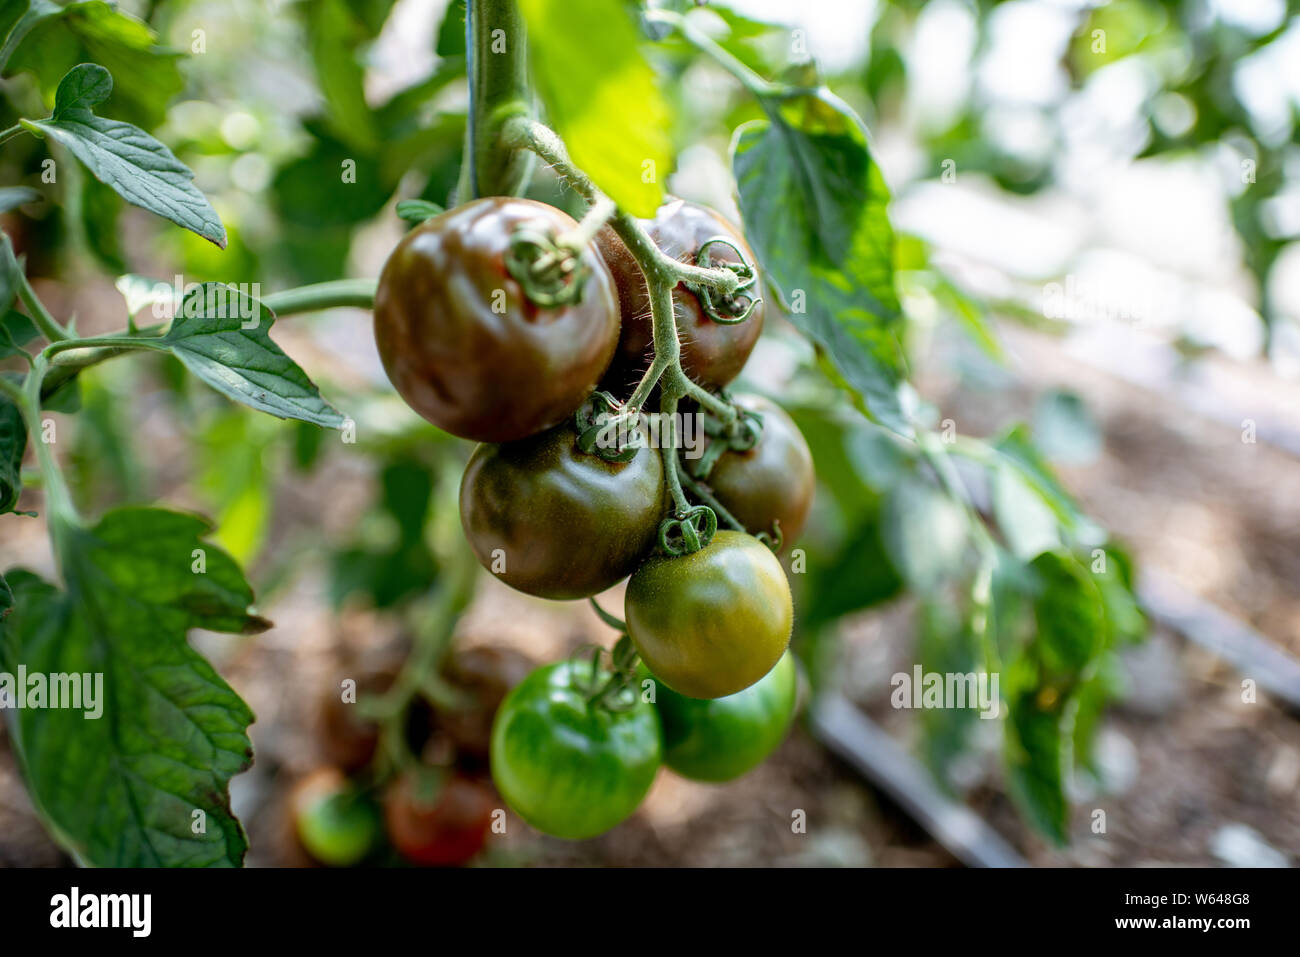 Branch with growing black tomatoes on the organic plantation, close-up view Stock Photo